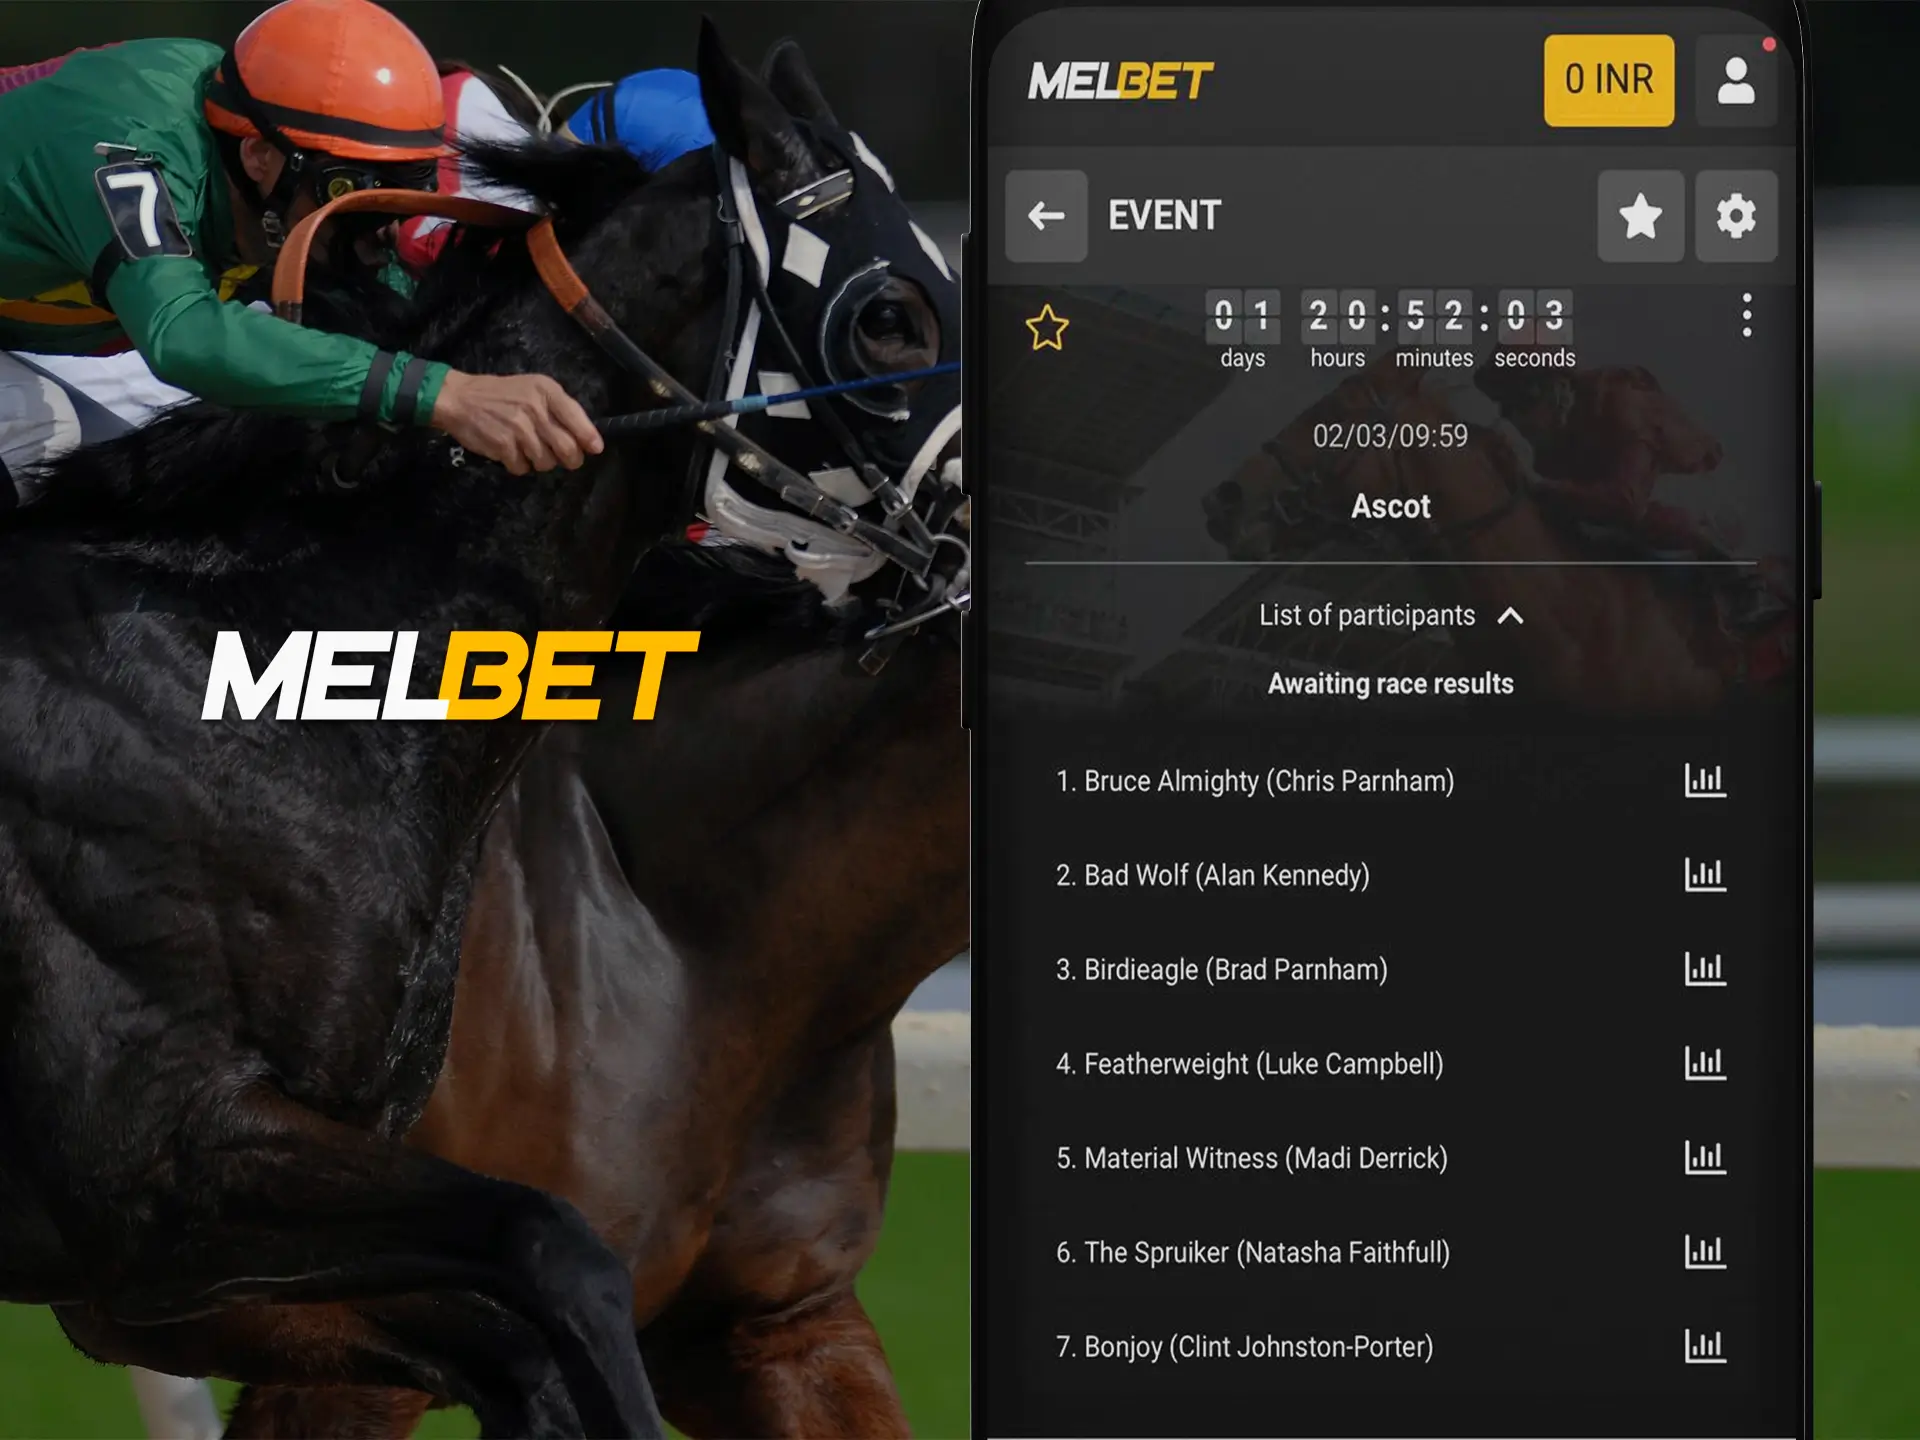 Melbet allows its customers to bet on horse racing from any mobile device.